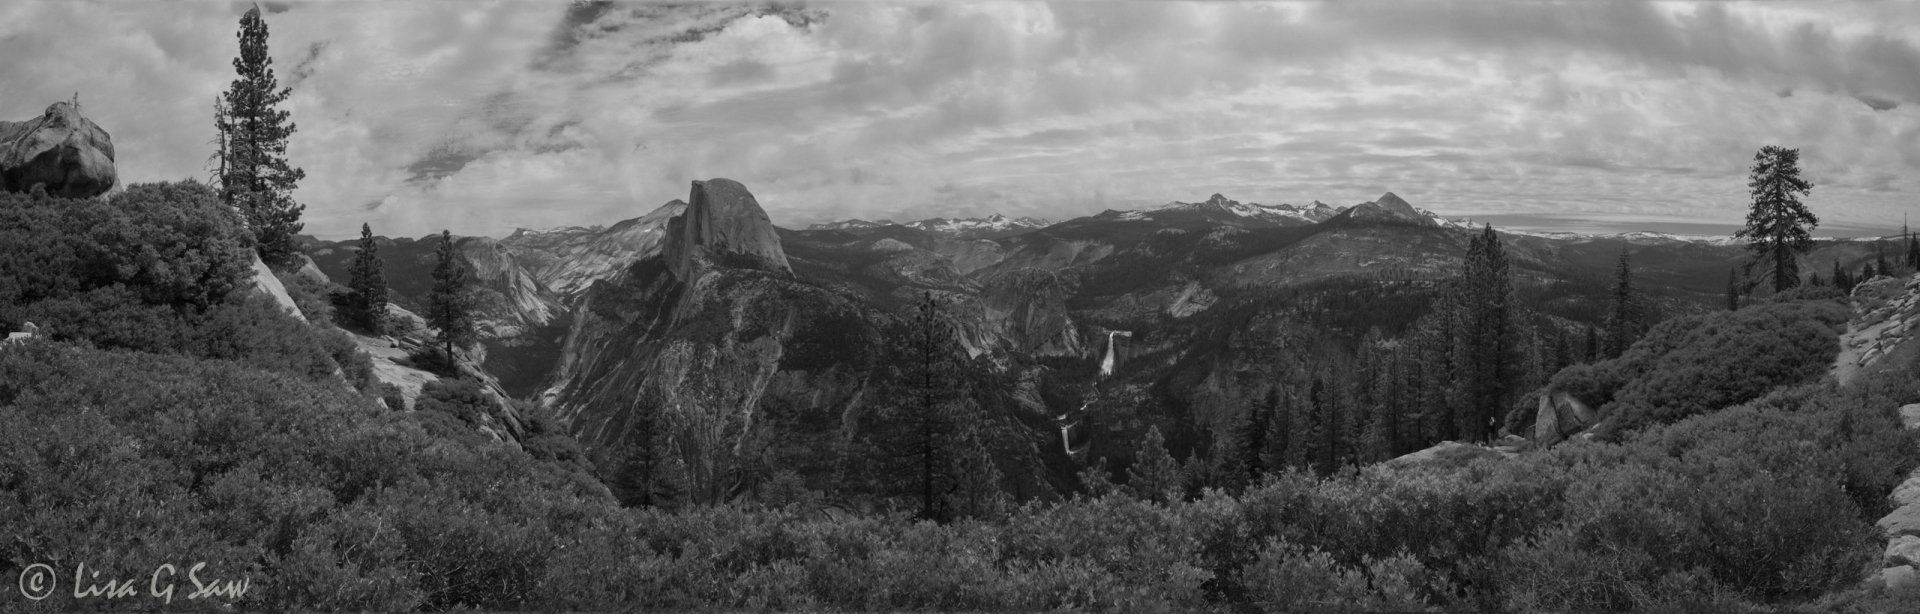 Panoramic view of Half Dome from Glacier Point (black and white)